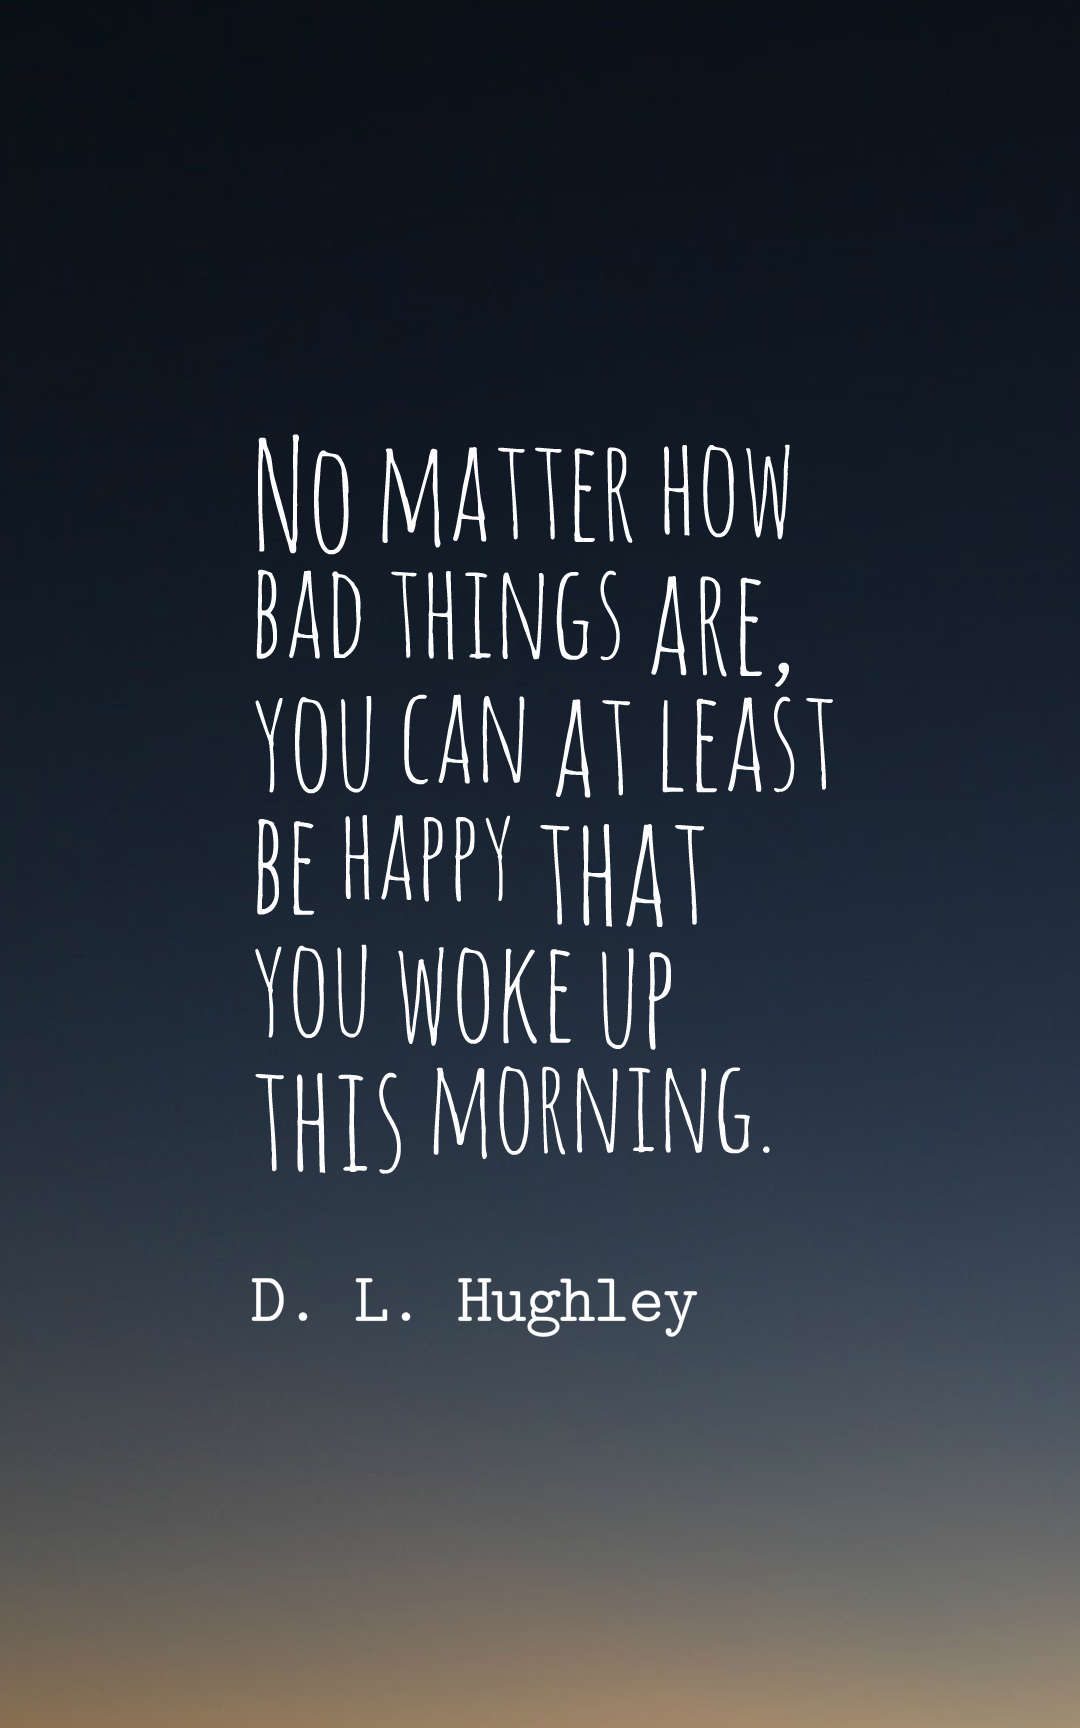 No matter how bad things are, you can at least be happy that you woke up this morning.